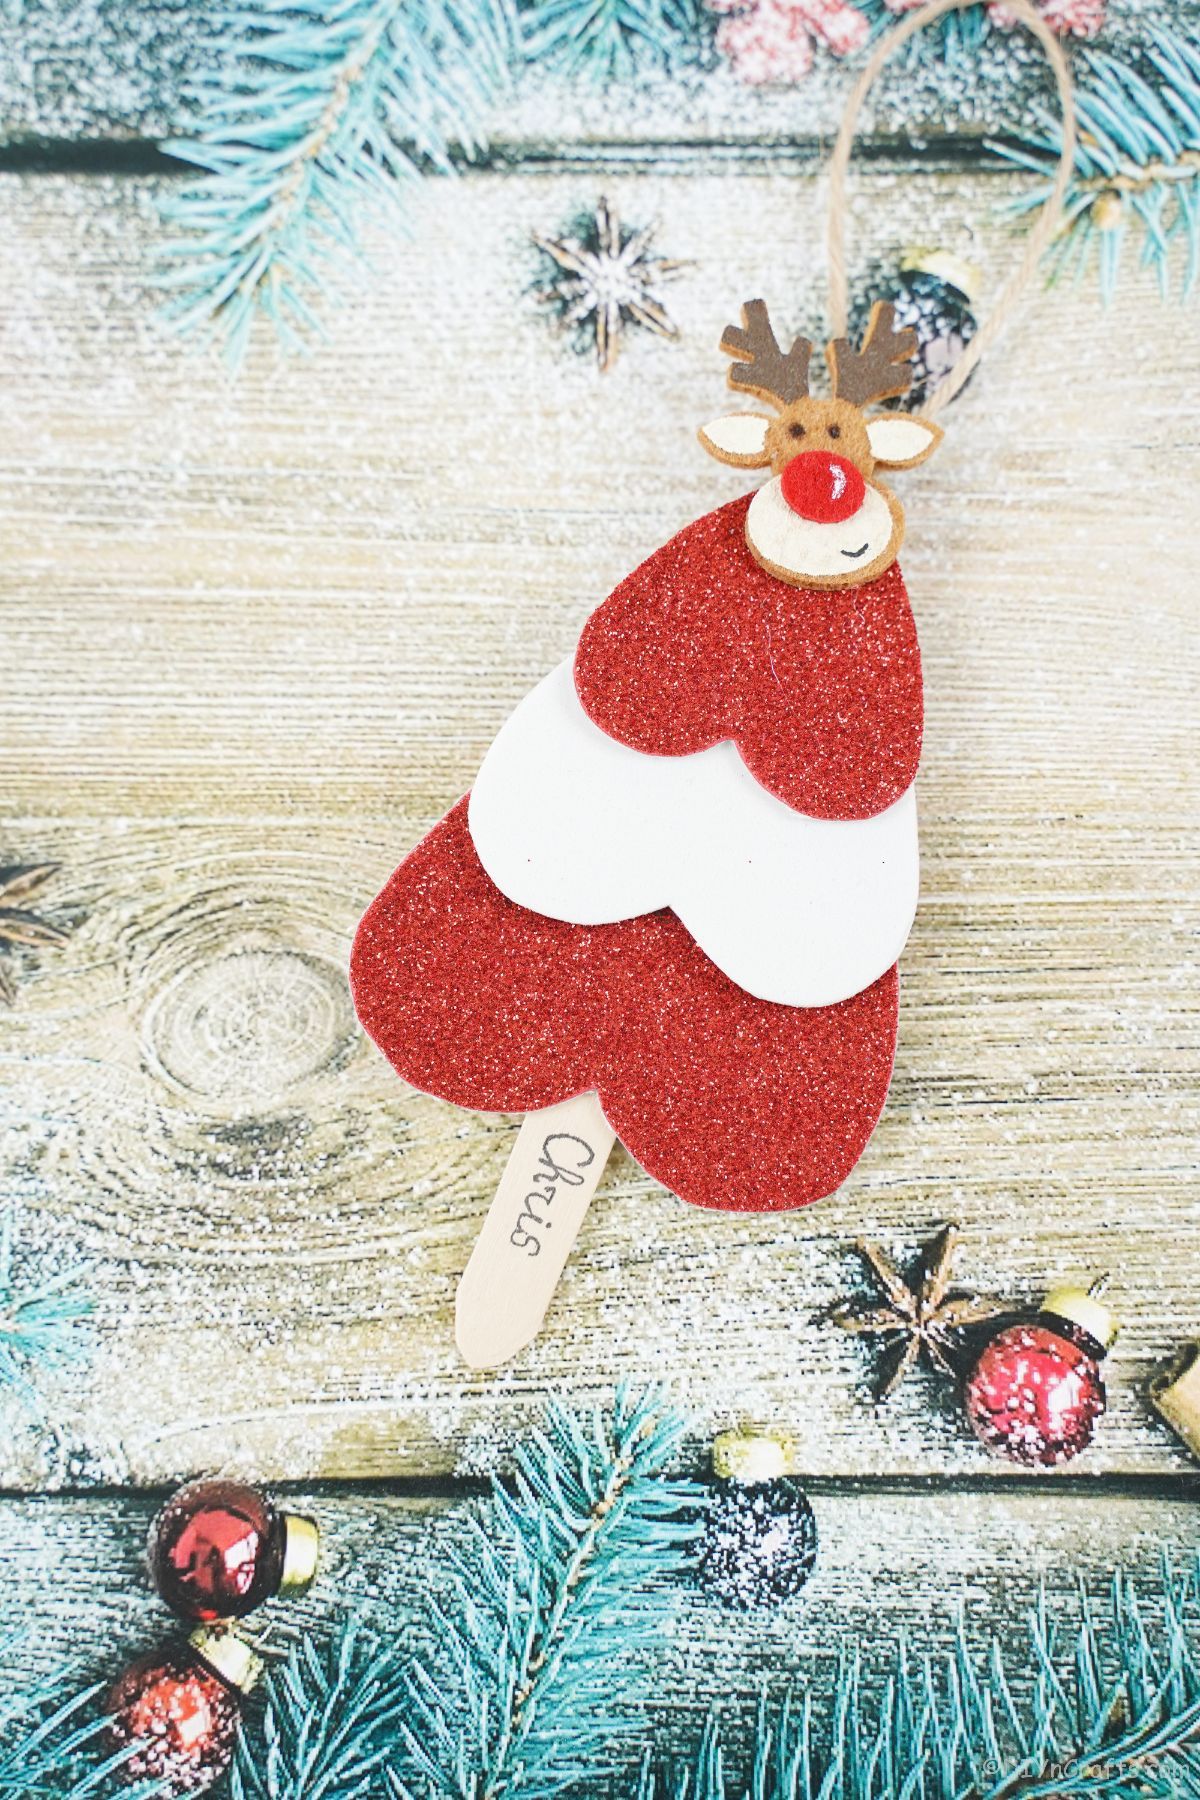 paper candy cane striped mini tree ornament laying on holiday themed paper